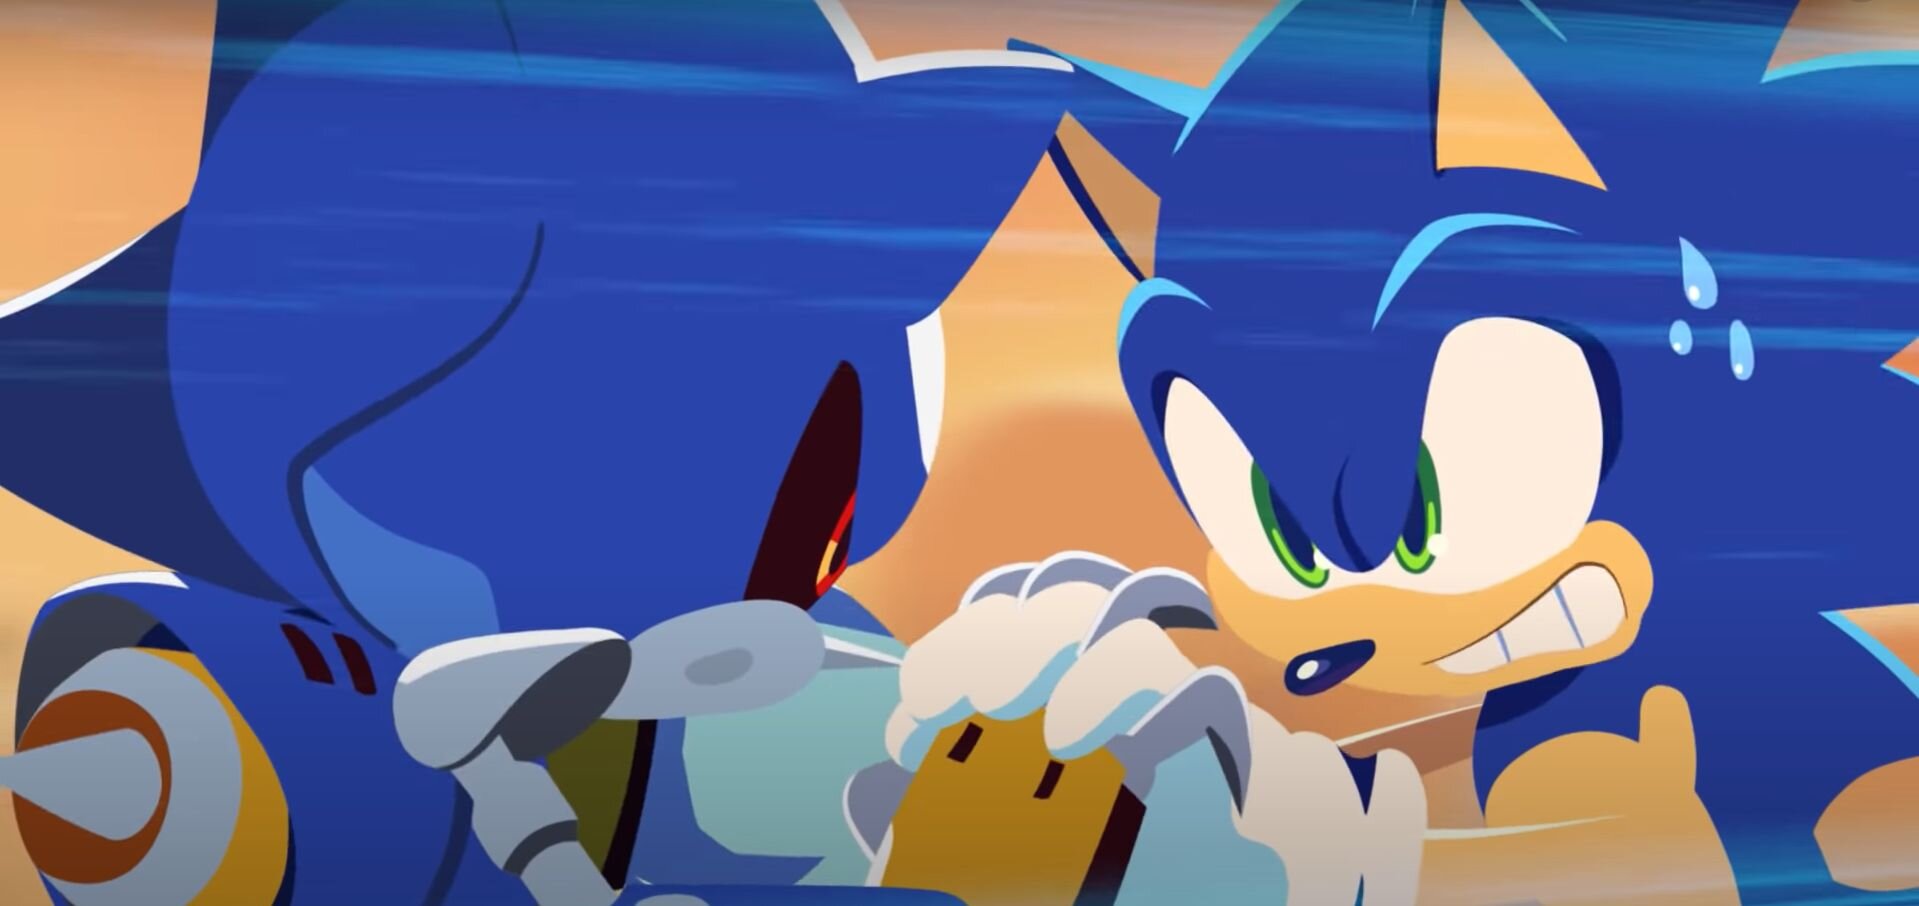 Sega Releases Episode 2 of Sonic Animation RISE OF THE WISPS